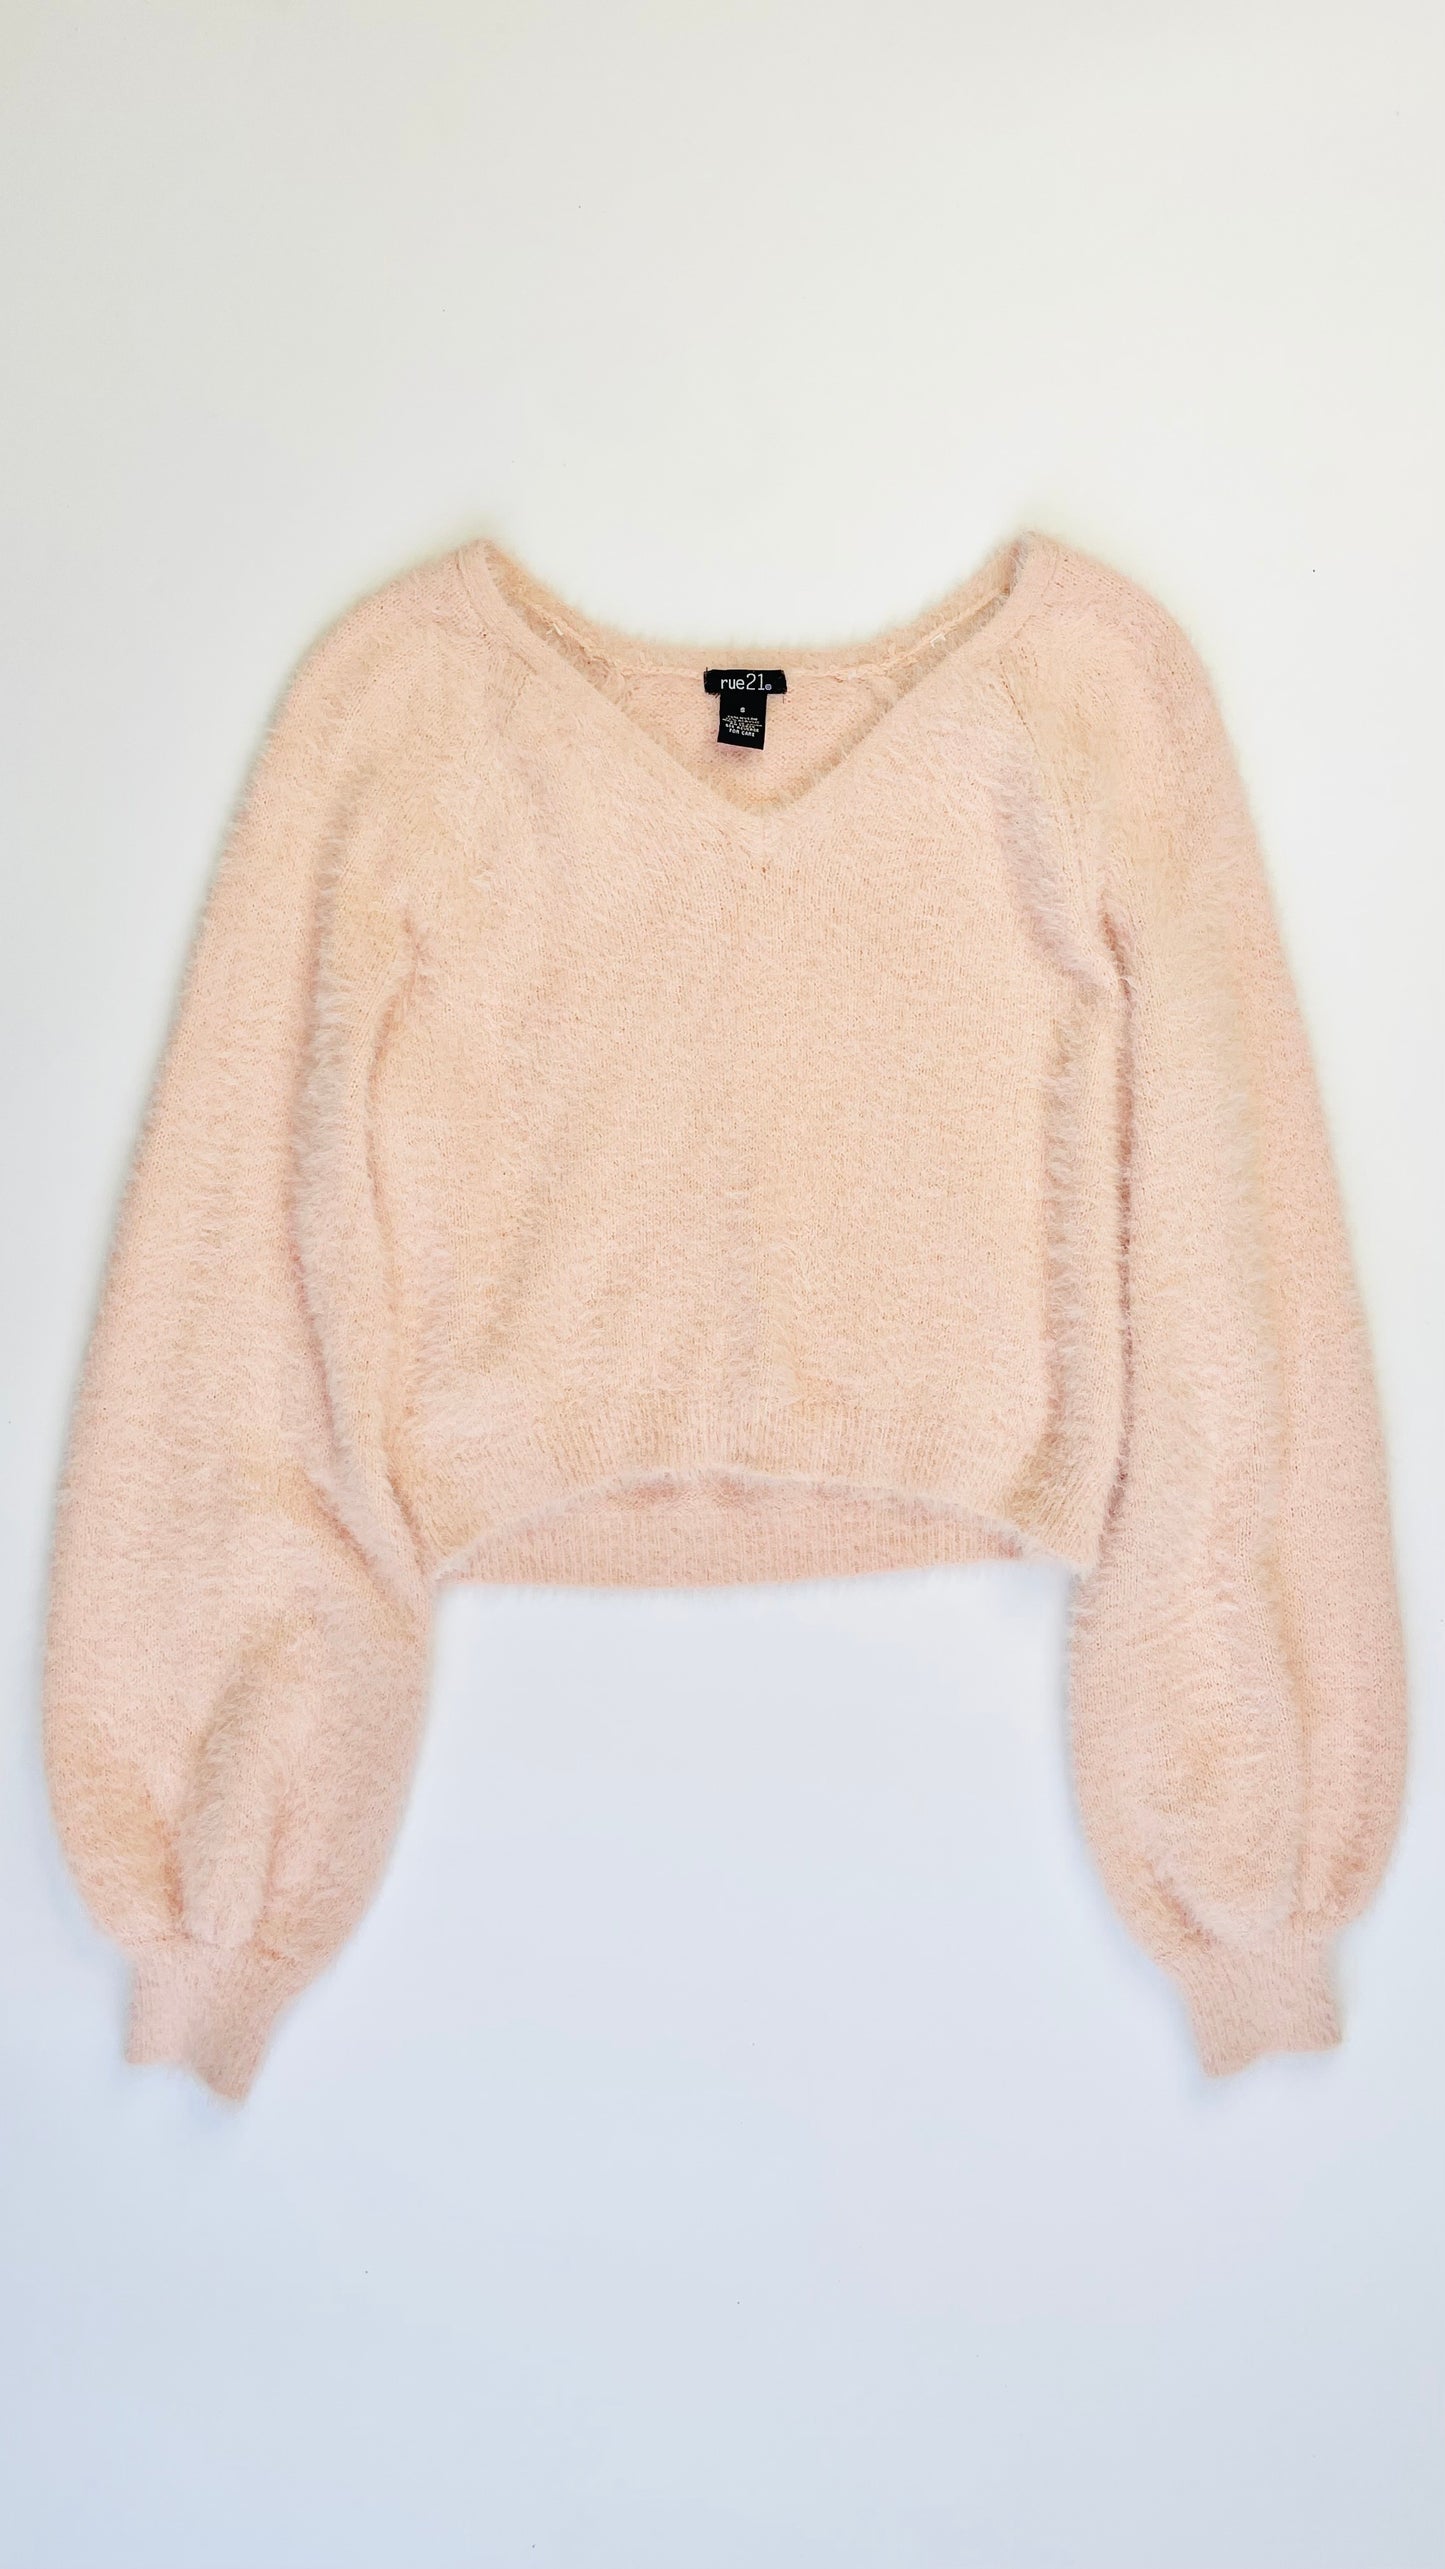 Vintage 90s Rue 21 baby pink fuzzy knit sweater- Size S